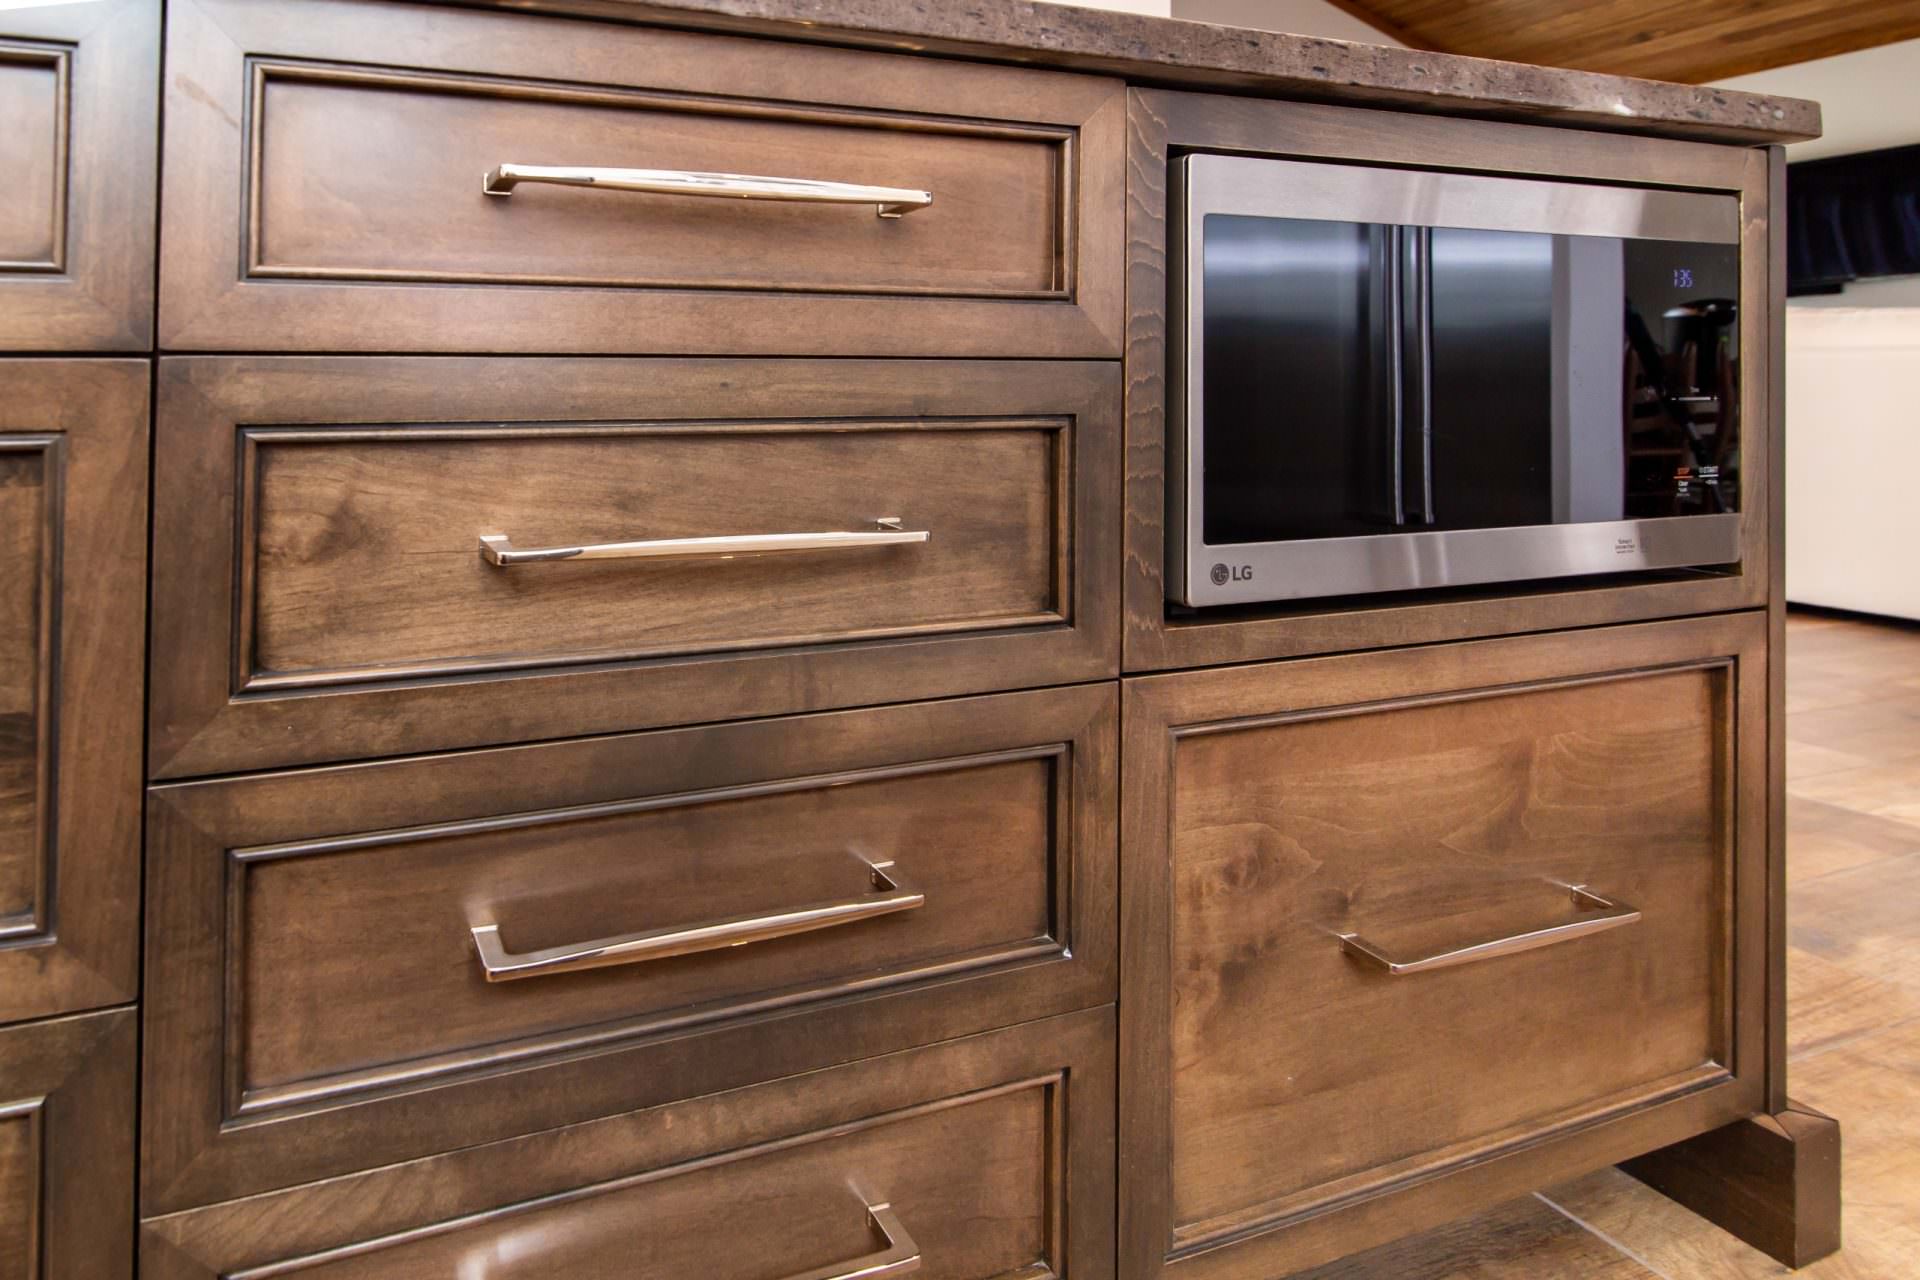 Are Natural Wood Cabinets Out Of Style, Are Maple Kitchen Cabinets Out Of Style 2021